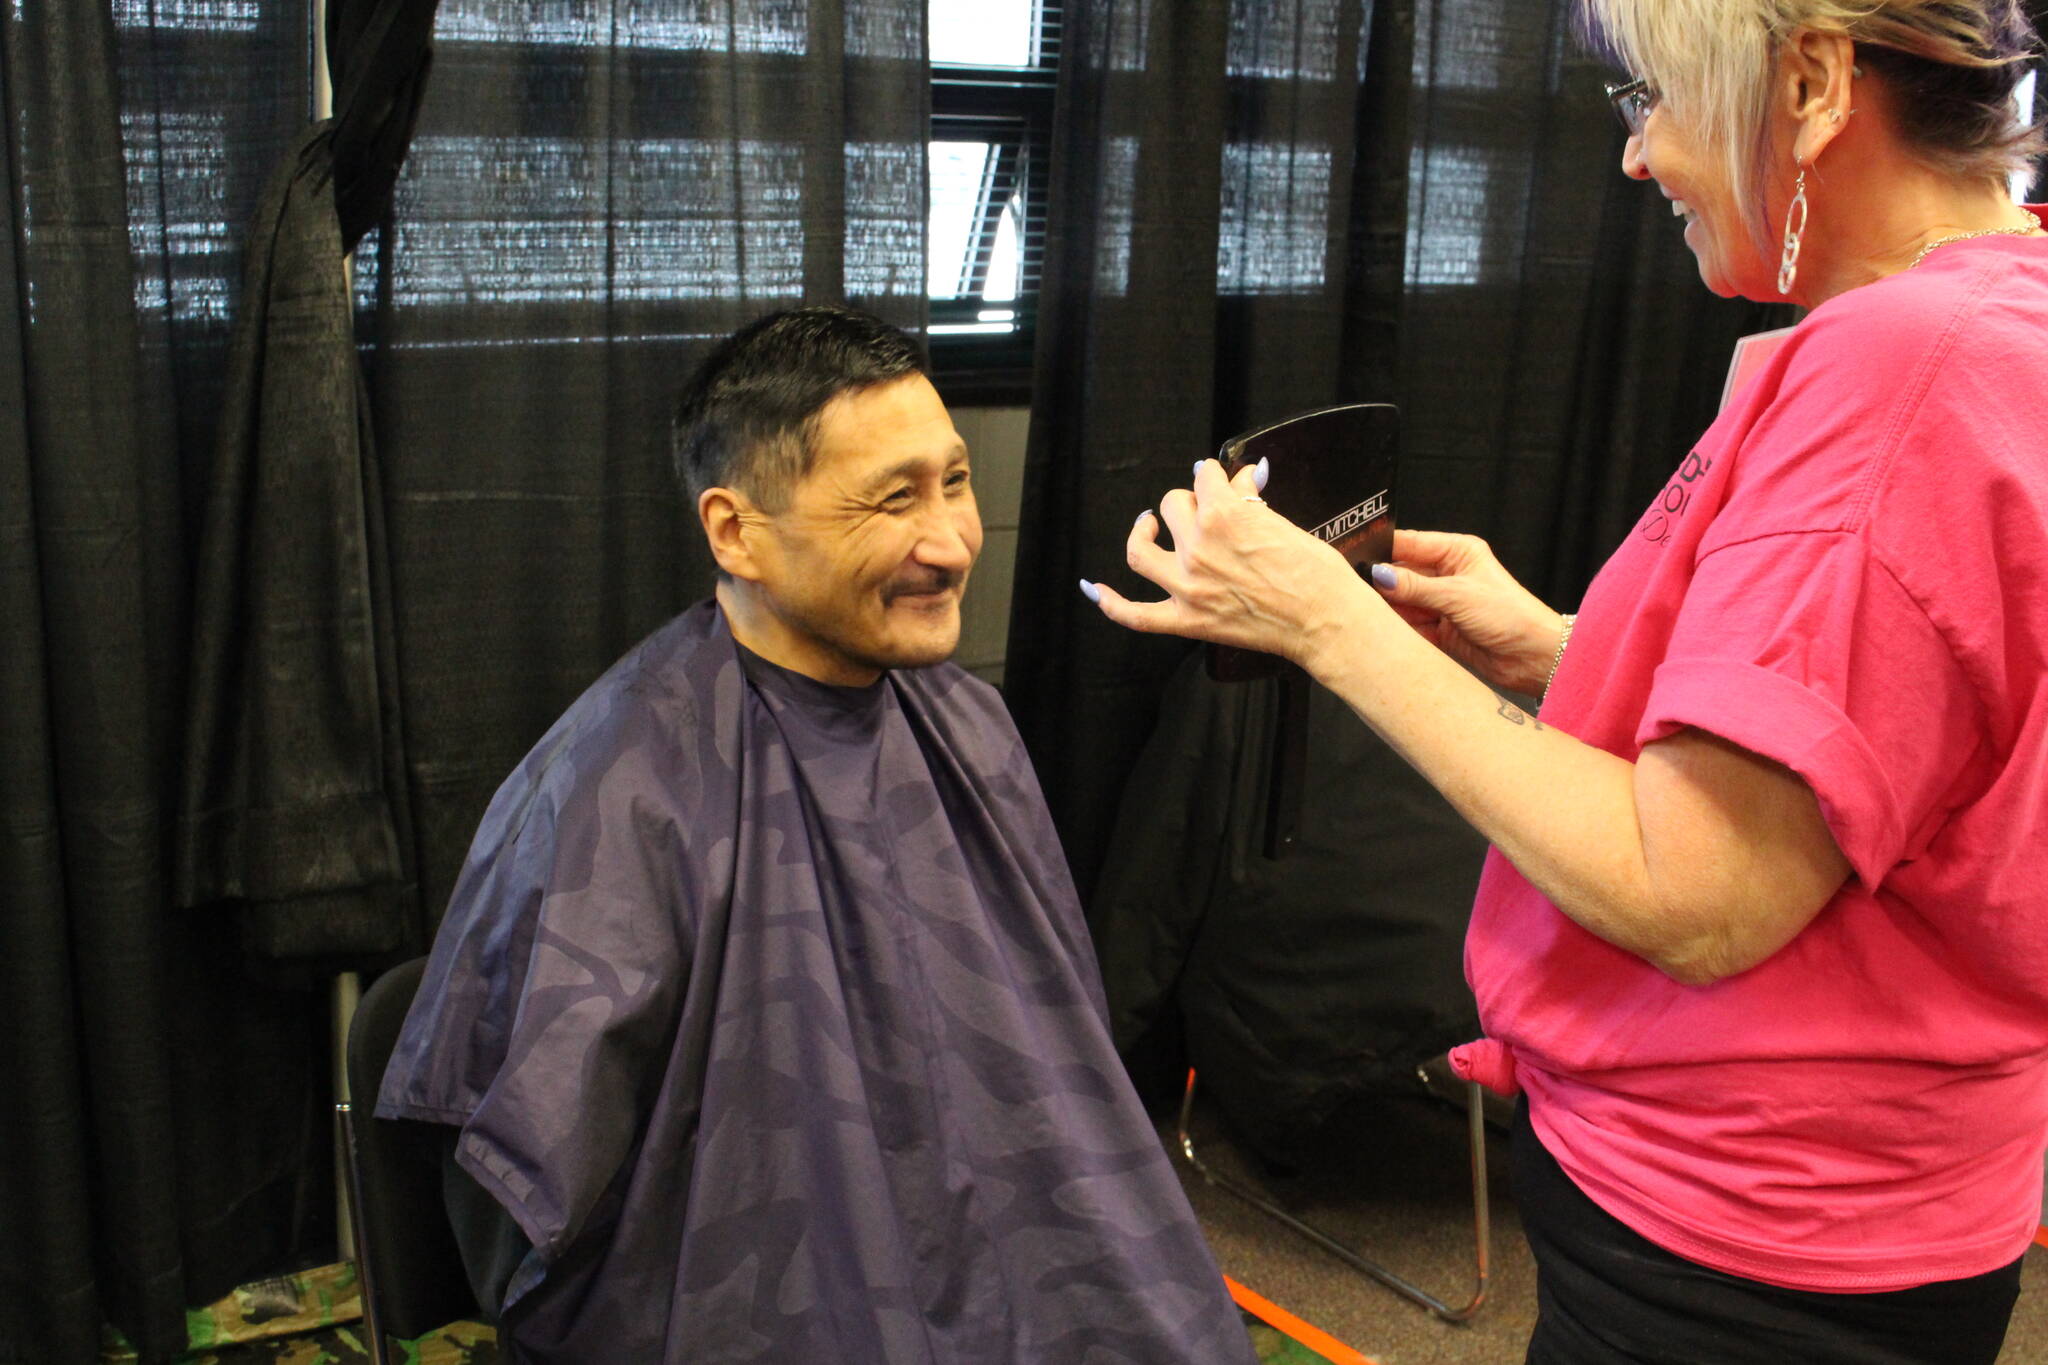 Henry Smith checks out his fresh haircut courtesy of Gail Kennedy during the 2020 Project Homeless Connect event at the Soldotna Regional Sports Complex in Soldotna, Alaska on Jan. 29, 2020. (Photo by Brian Mazurek/Peninsula Clarion)